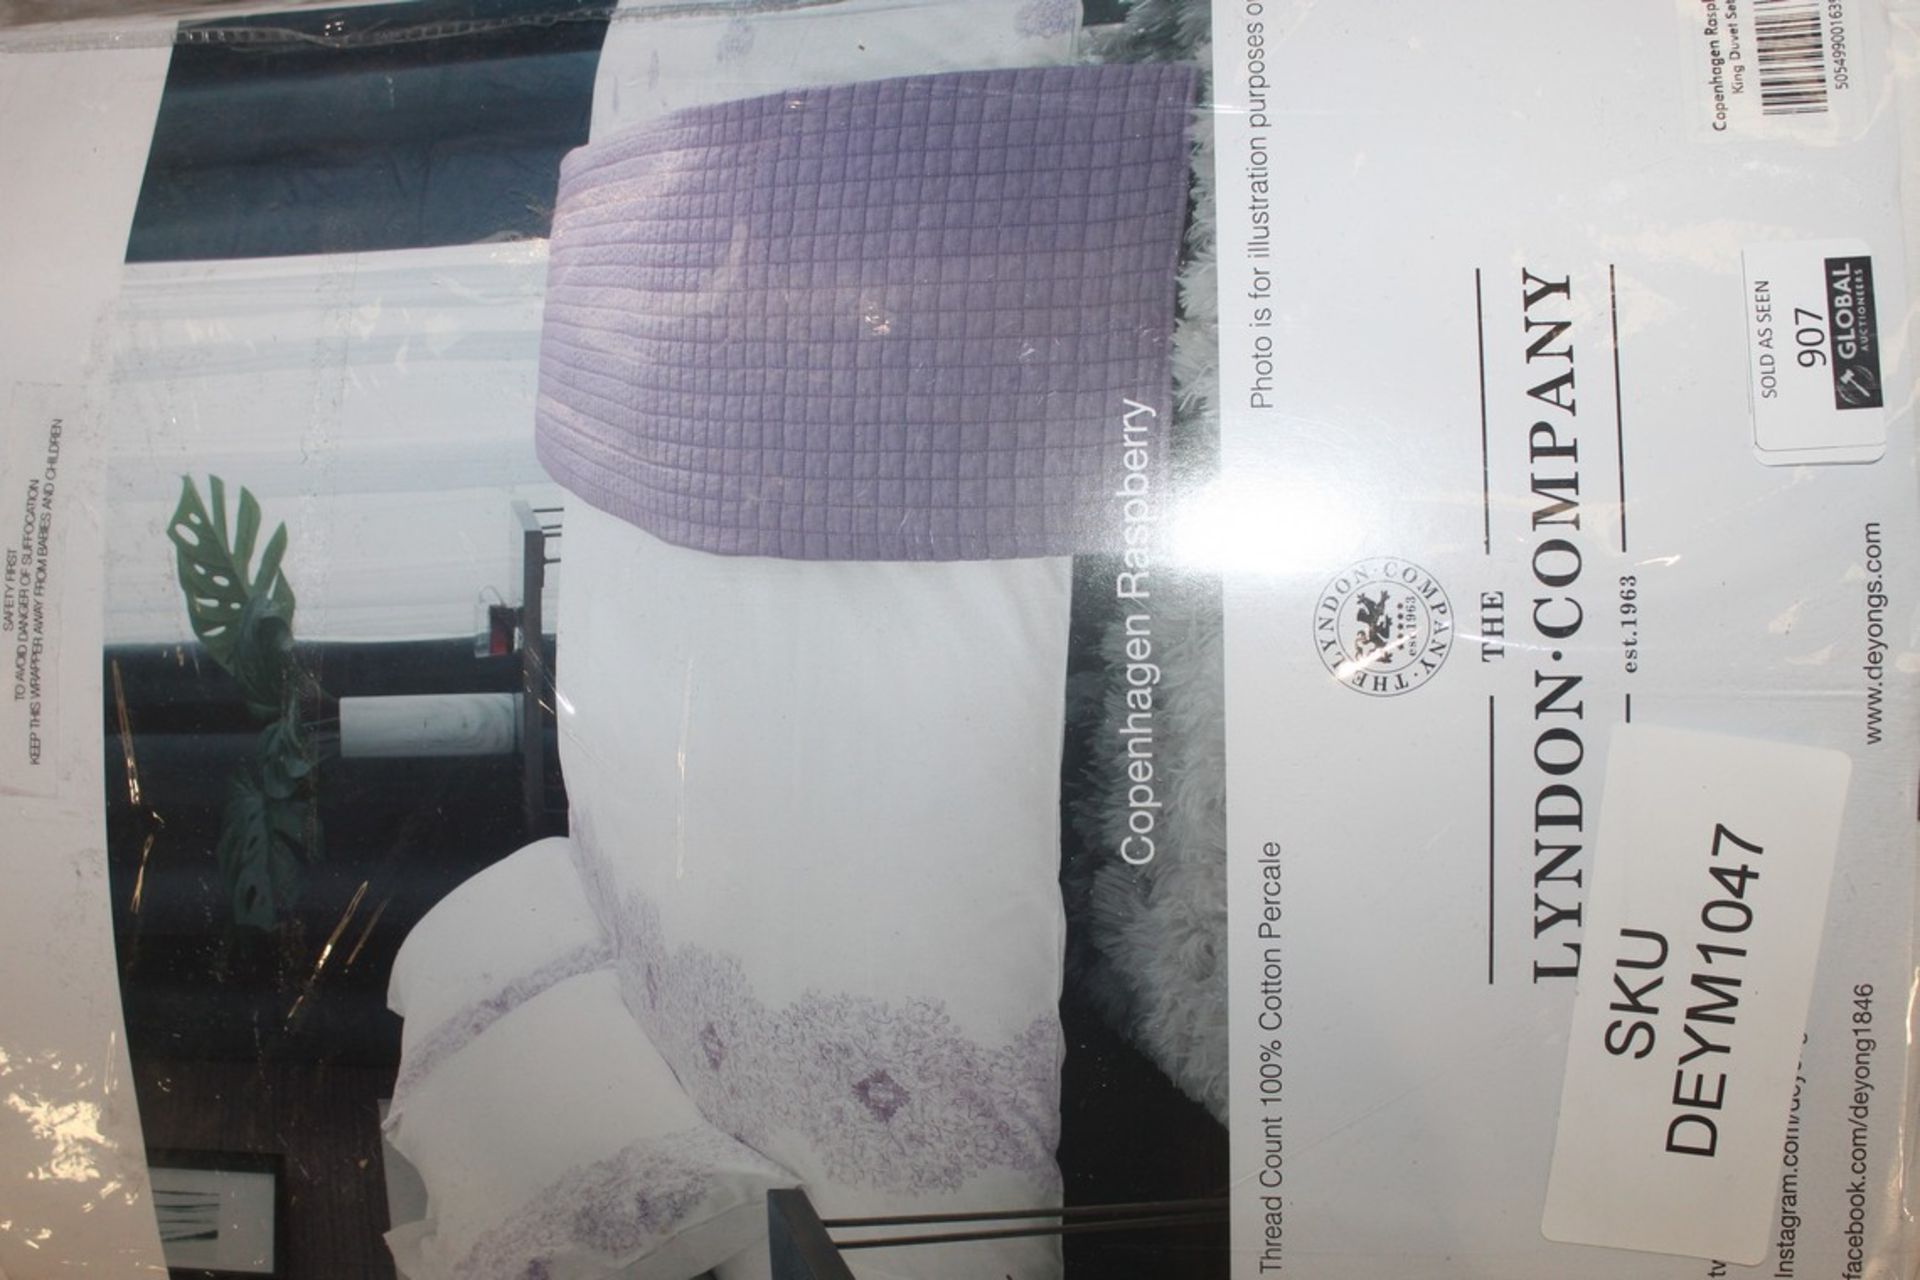 The Lyndon Company Copenhagan Raspnerry Kingsize Duvet Cover Set RRP £80 (Pictures Are For